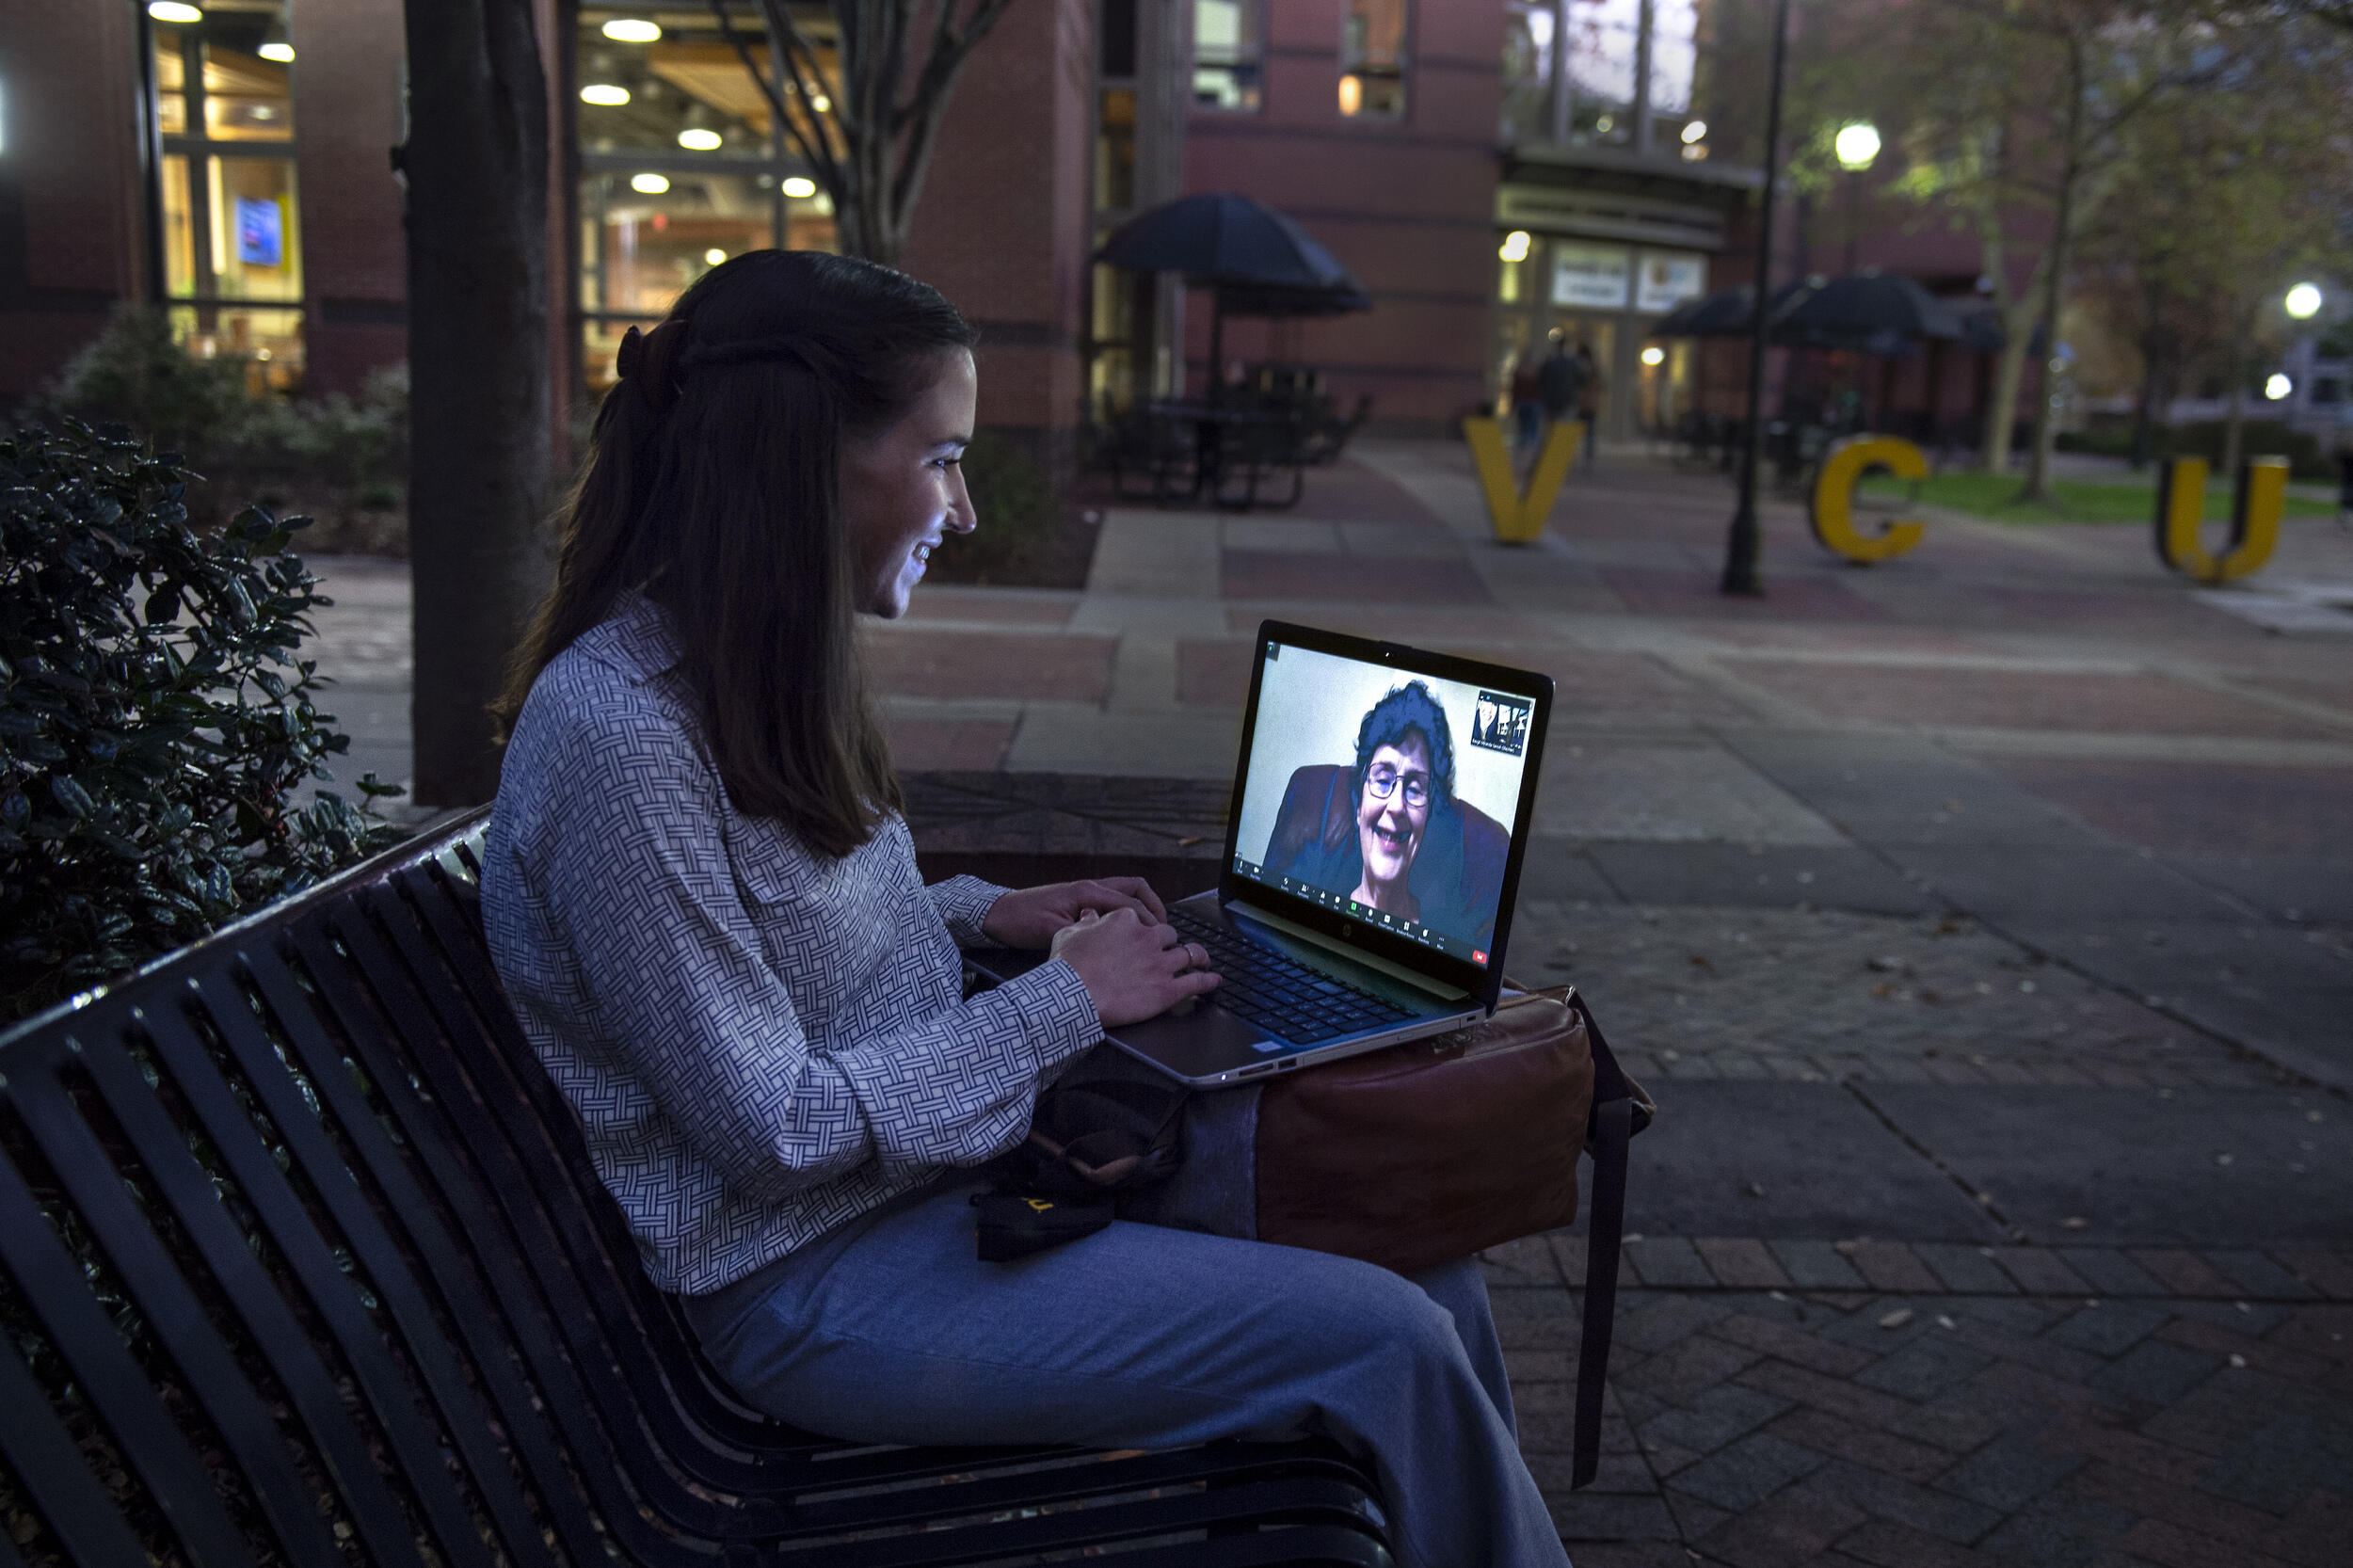 A student participates in a videoconference with a person while seated on a bench near near the Shafer Court Dining Center.